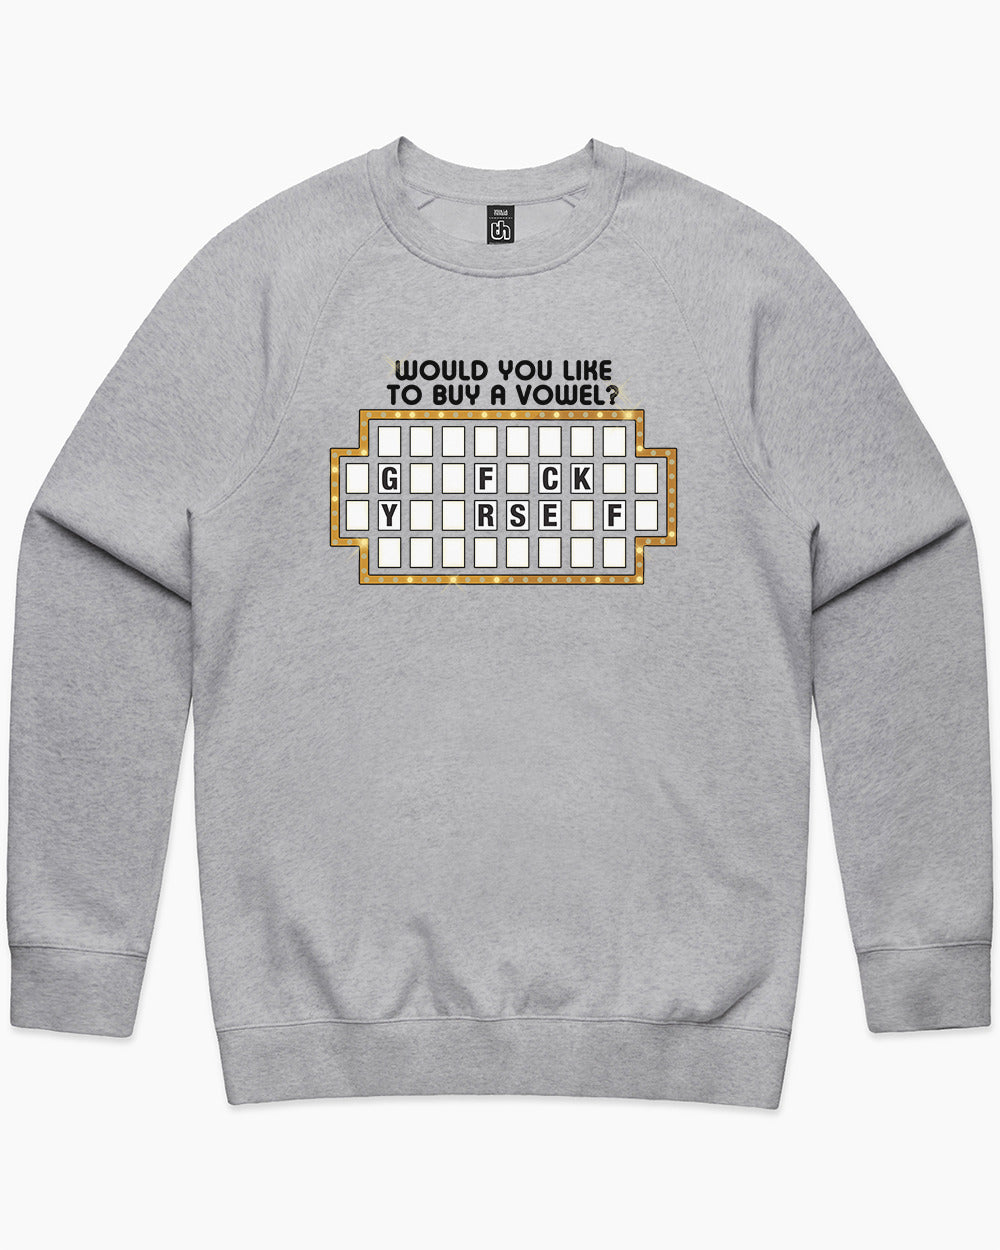 Would You Like To Buy A Vowel Or Would You To Buy A Vowel Sweater Australia Online #colour_grey